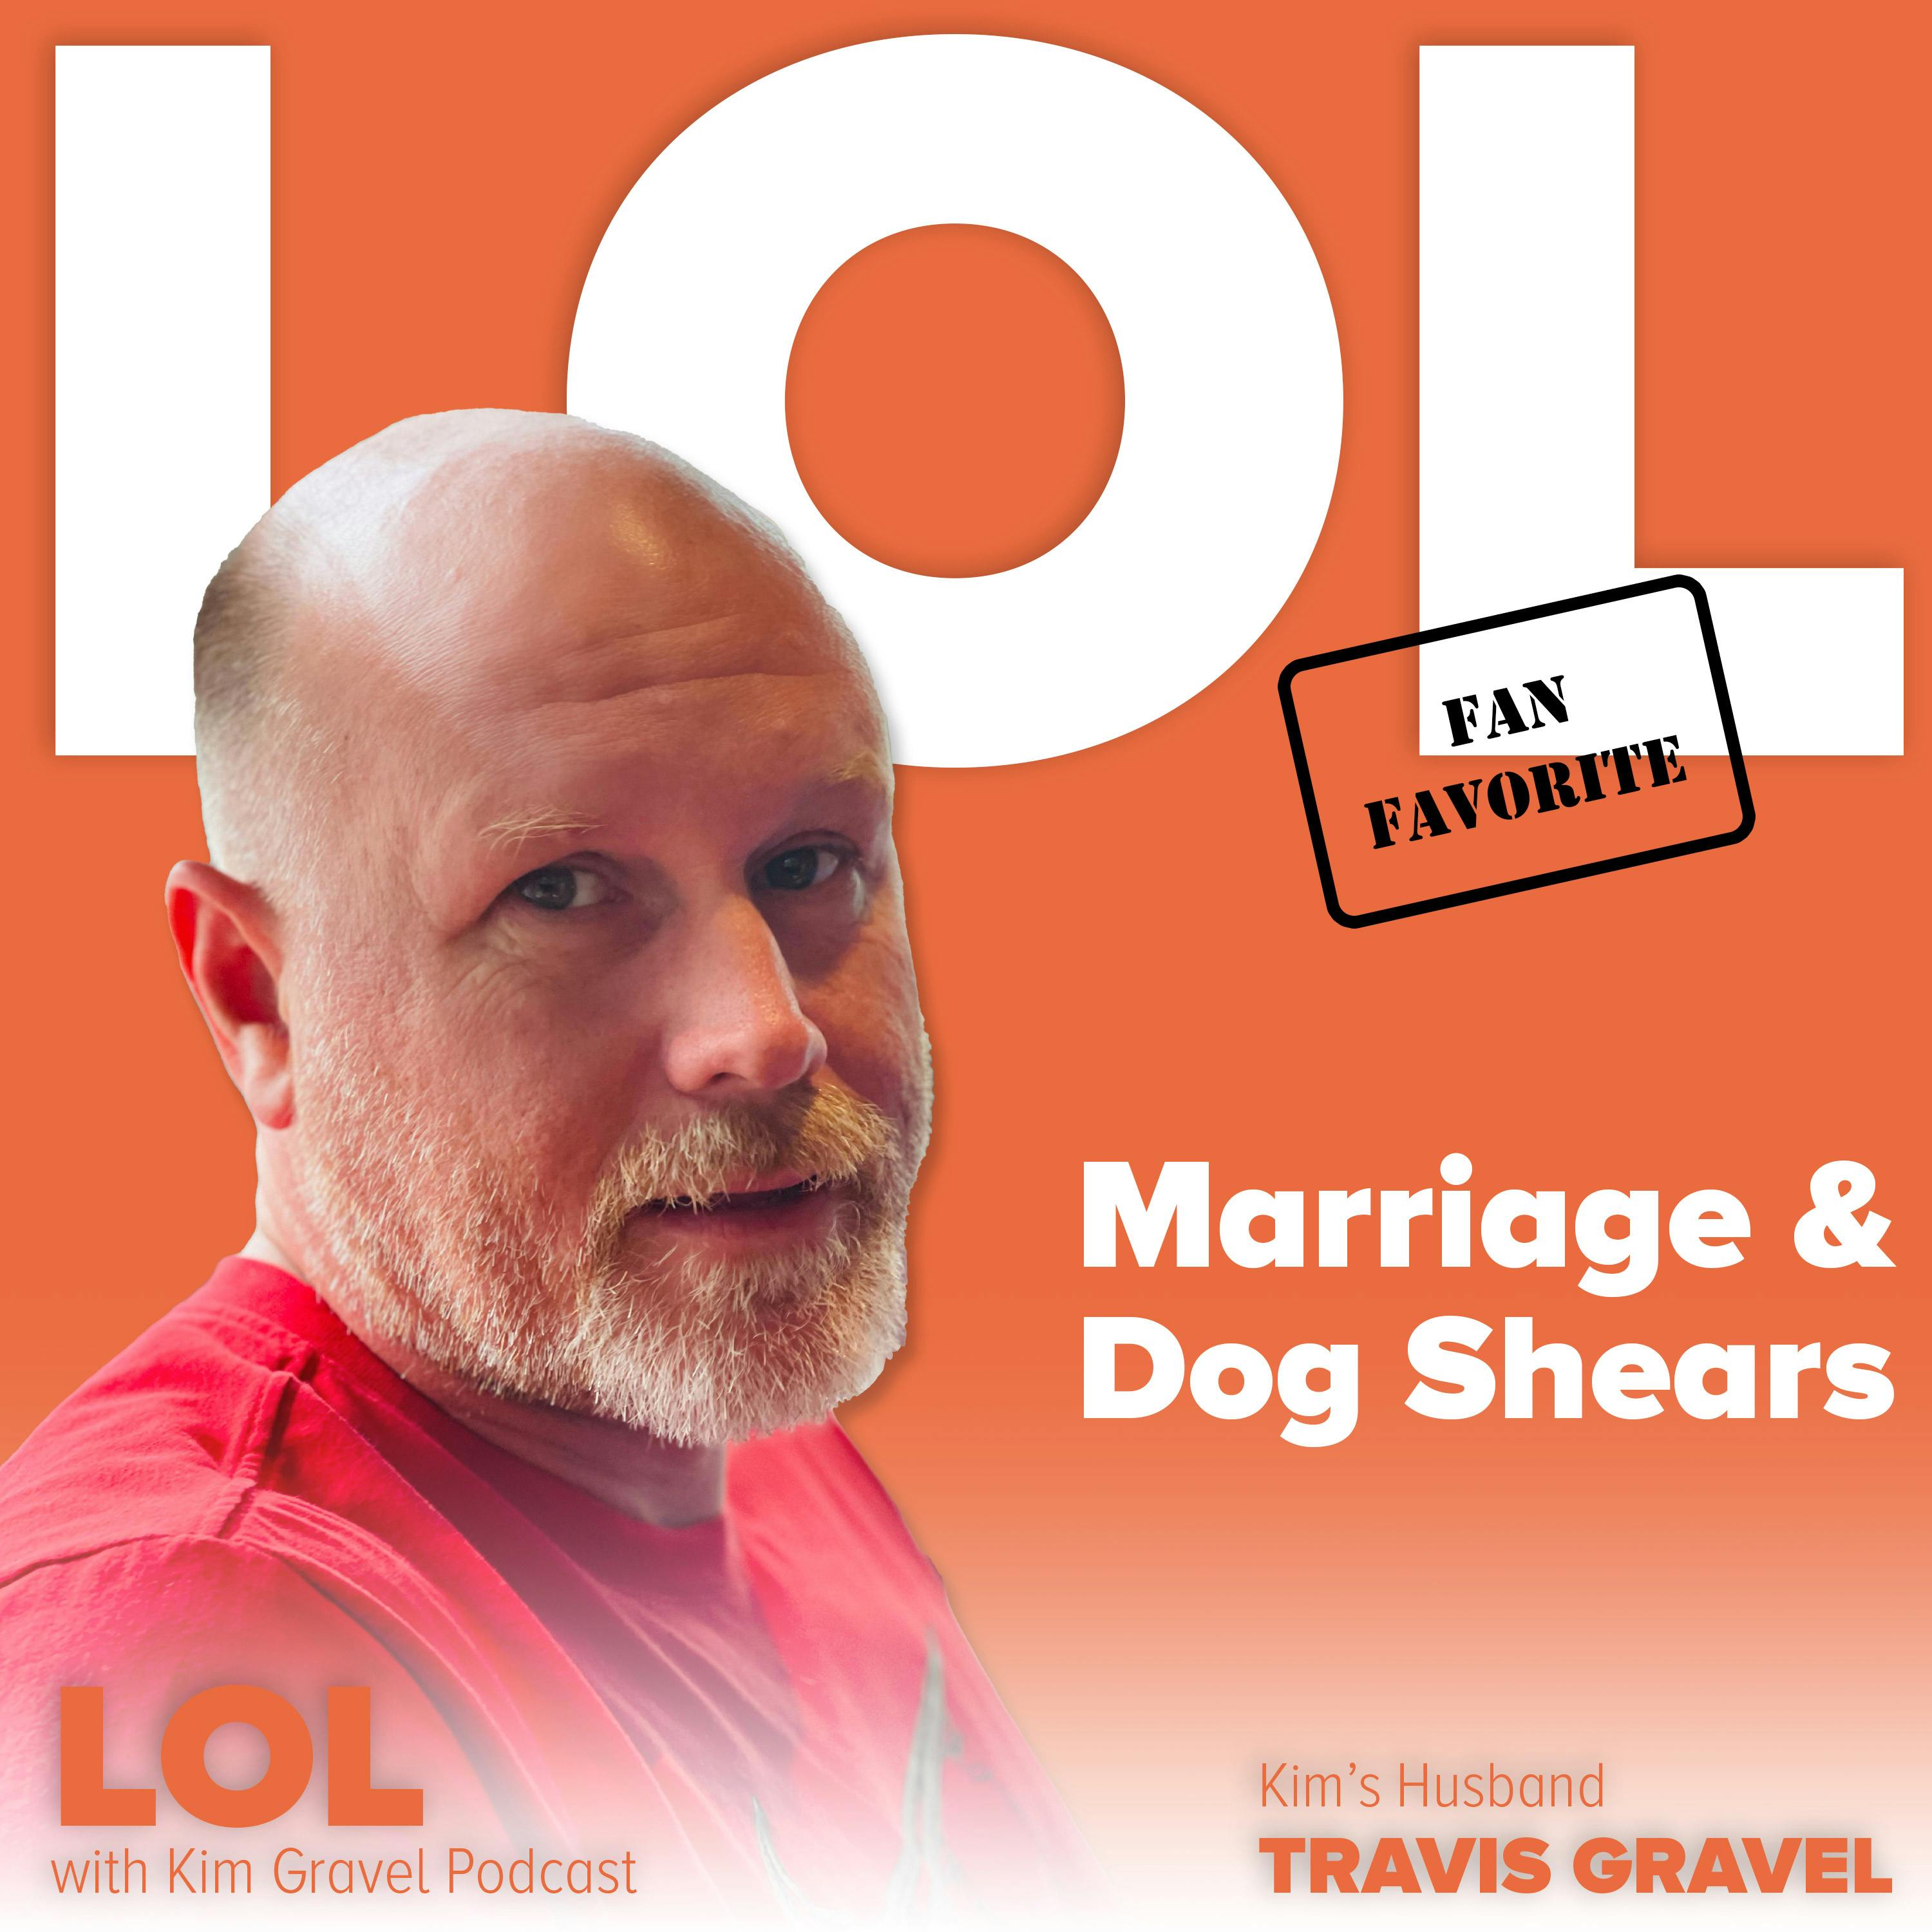 Fan Favorite: Marriage and Dog Shears with Kim’s Husband Travis Gravel